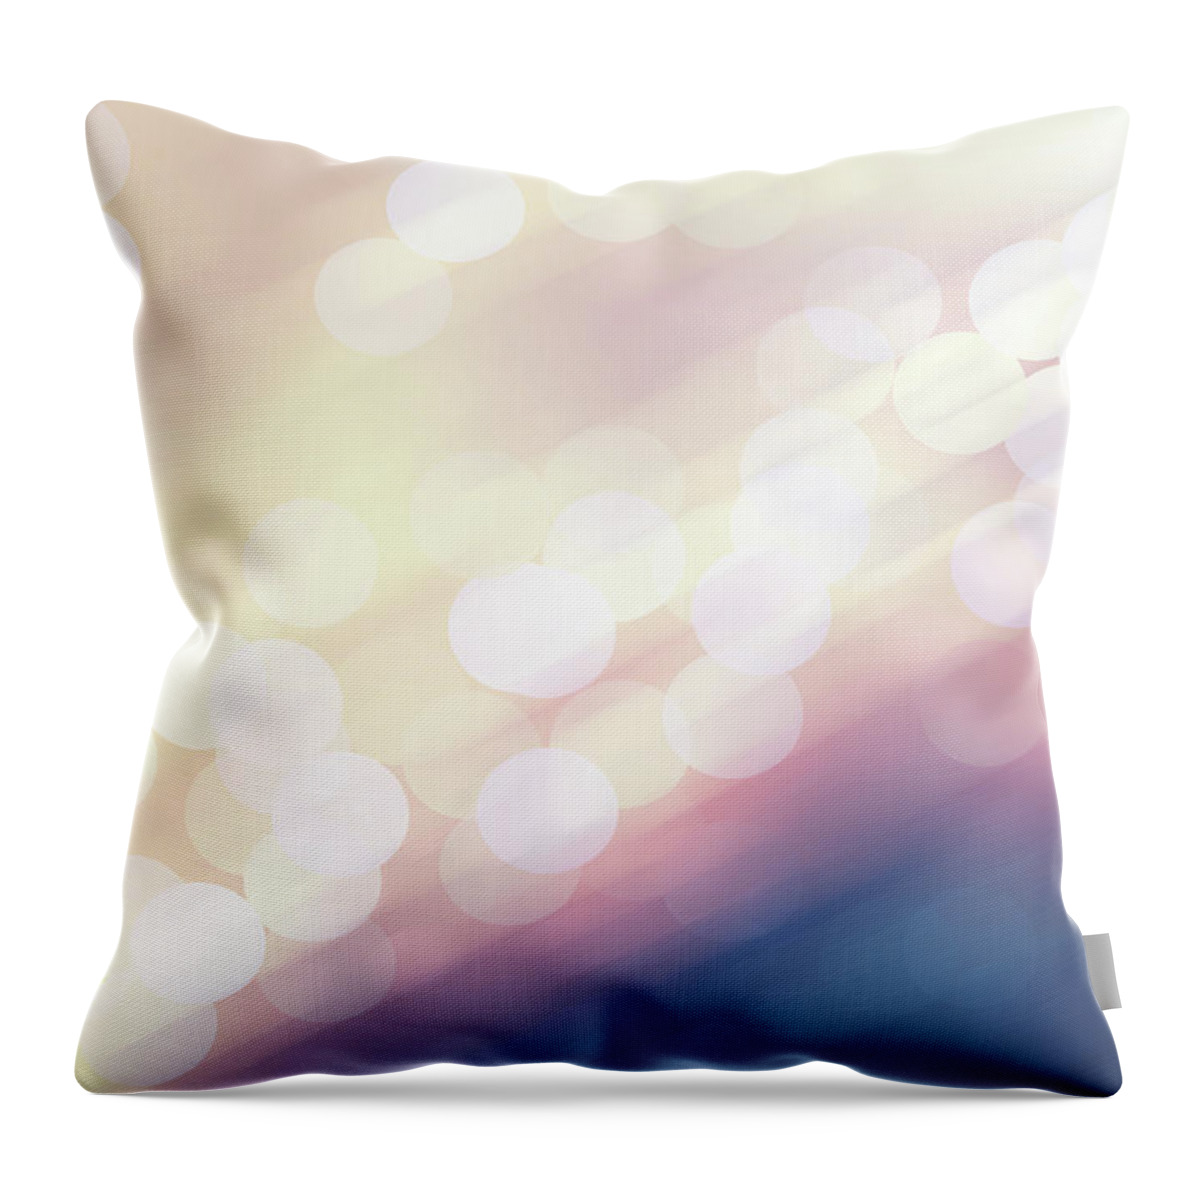 Celebration Throw Pillow featuring the photograph Defocused Lights by Liangpv